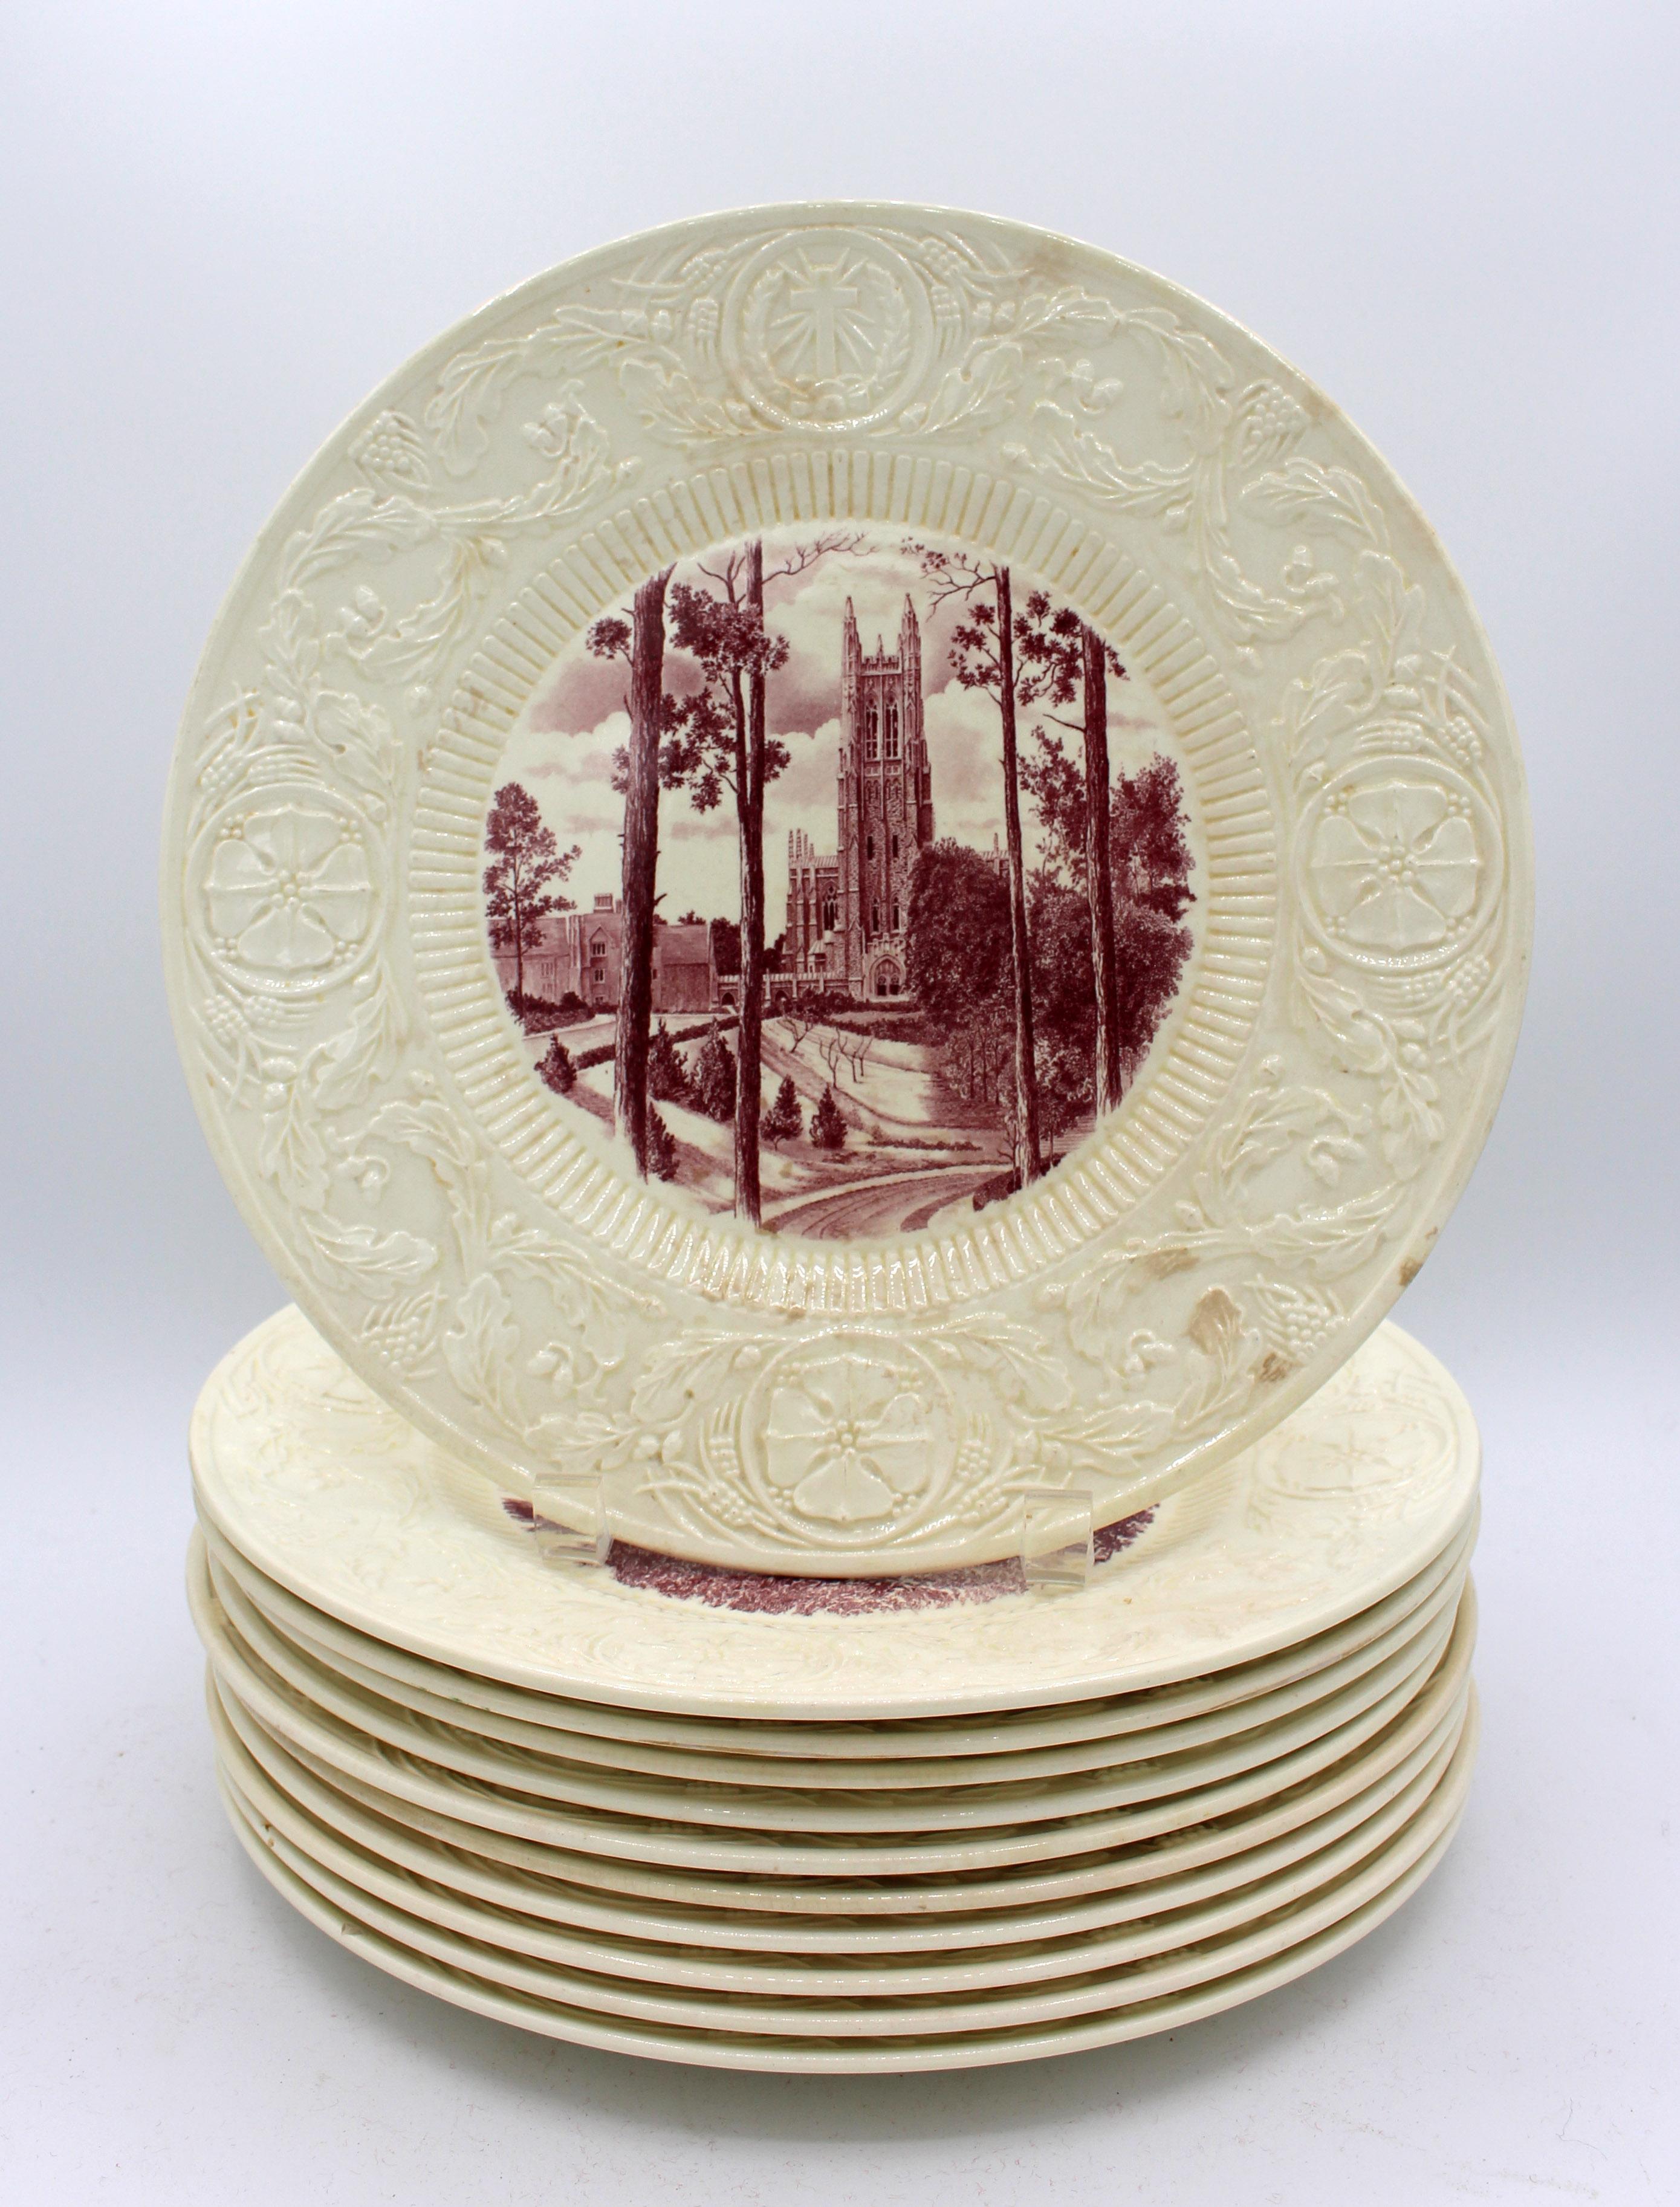 A set of 11 Duke University plates made by Wedgwood under the auspices of Jones, McDuffee & Stratton in 1937. Extremely rare 1st edition plates from an edition of 300 sets. Each carries the signature of William Preston Few, the first president of